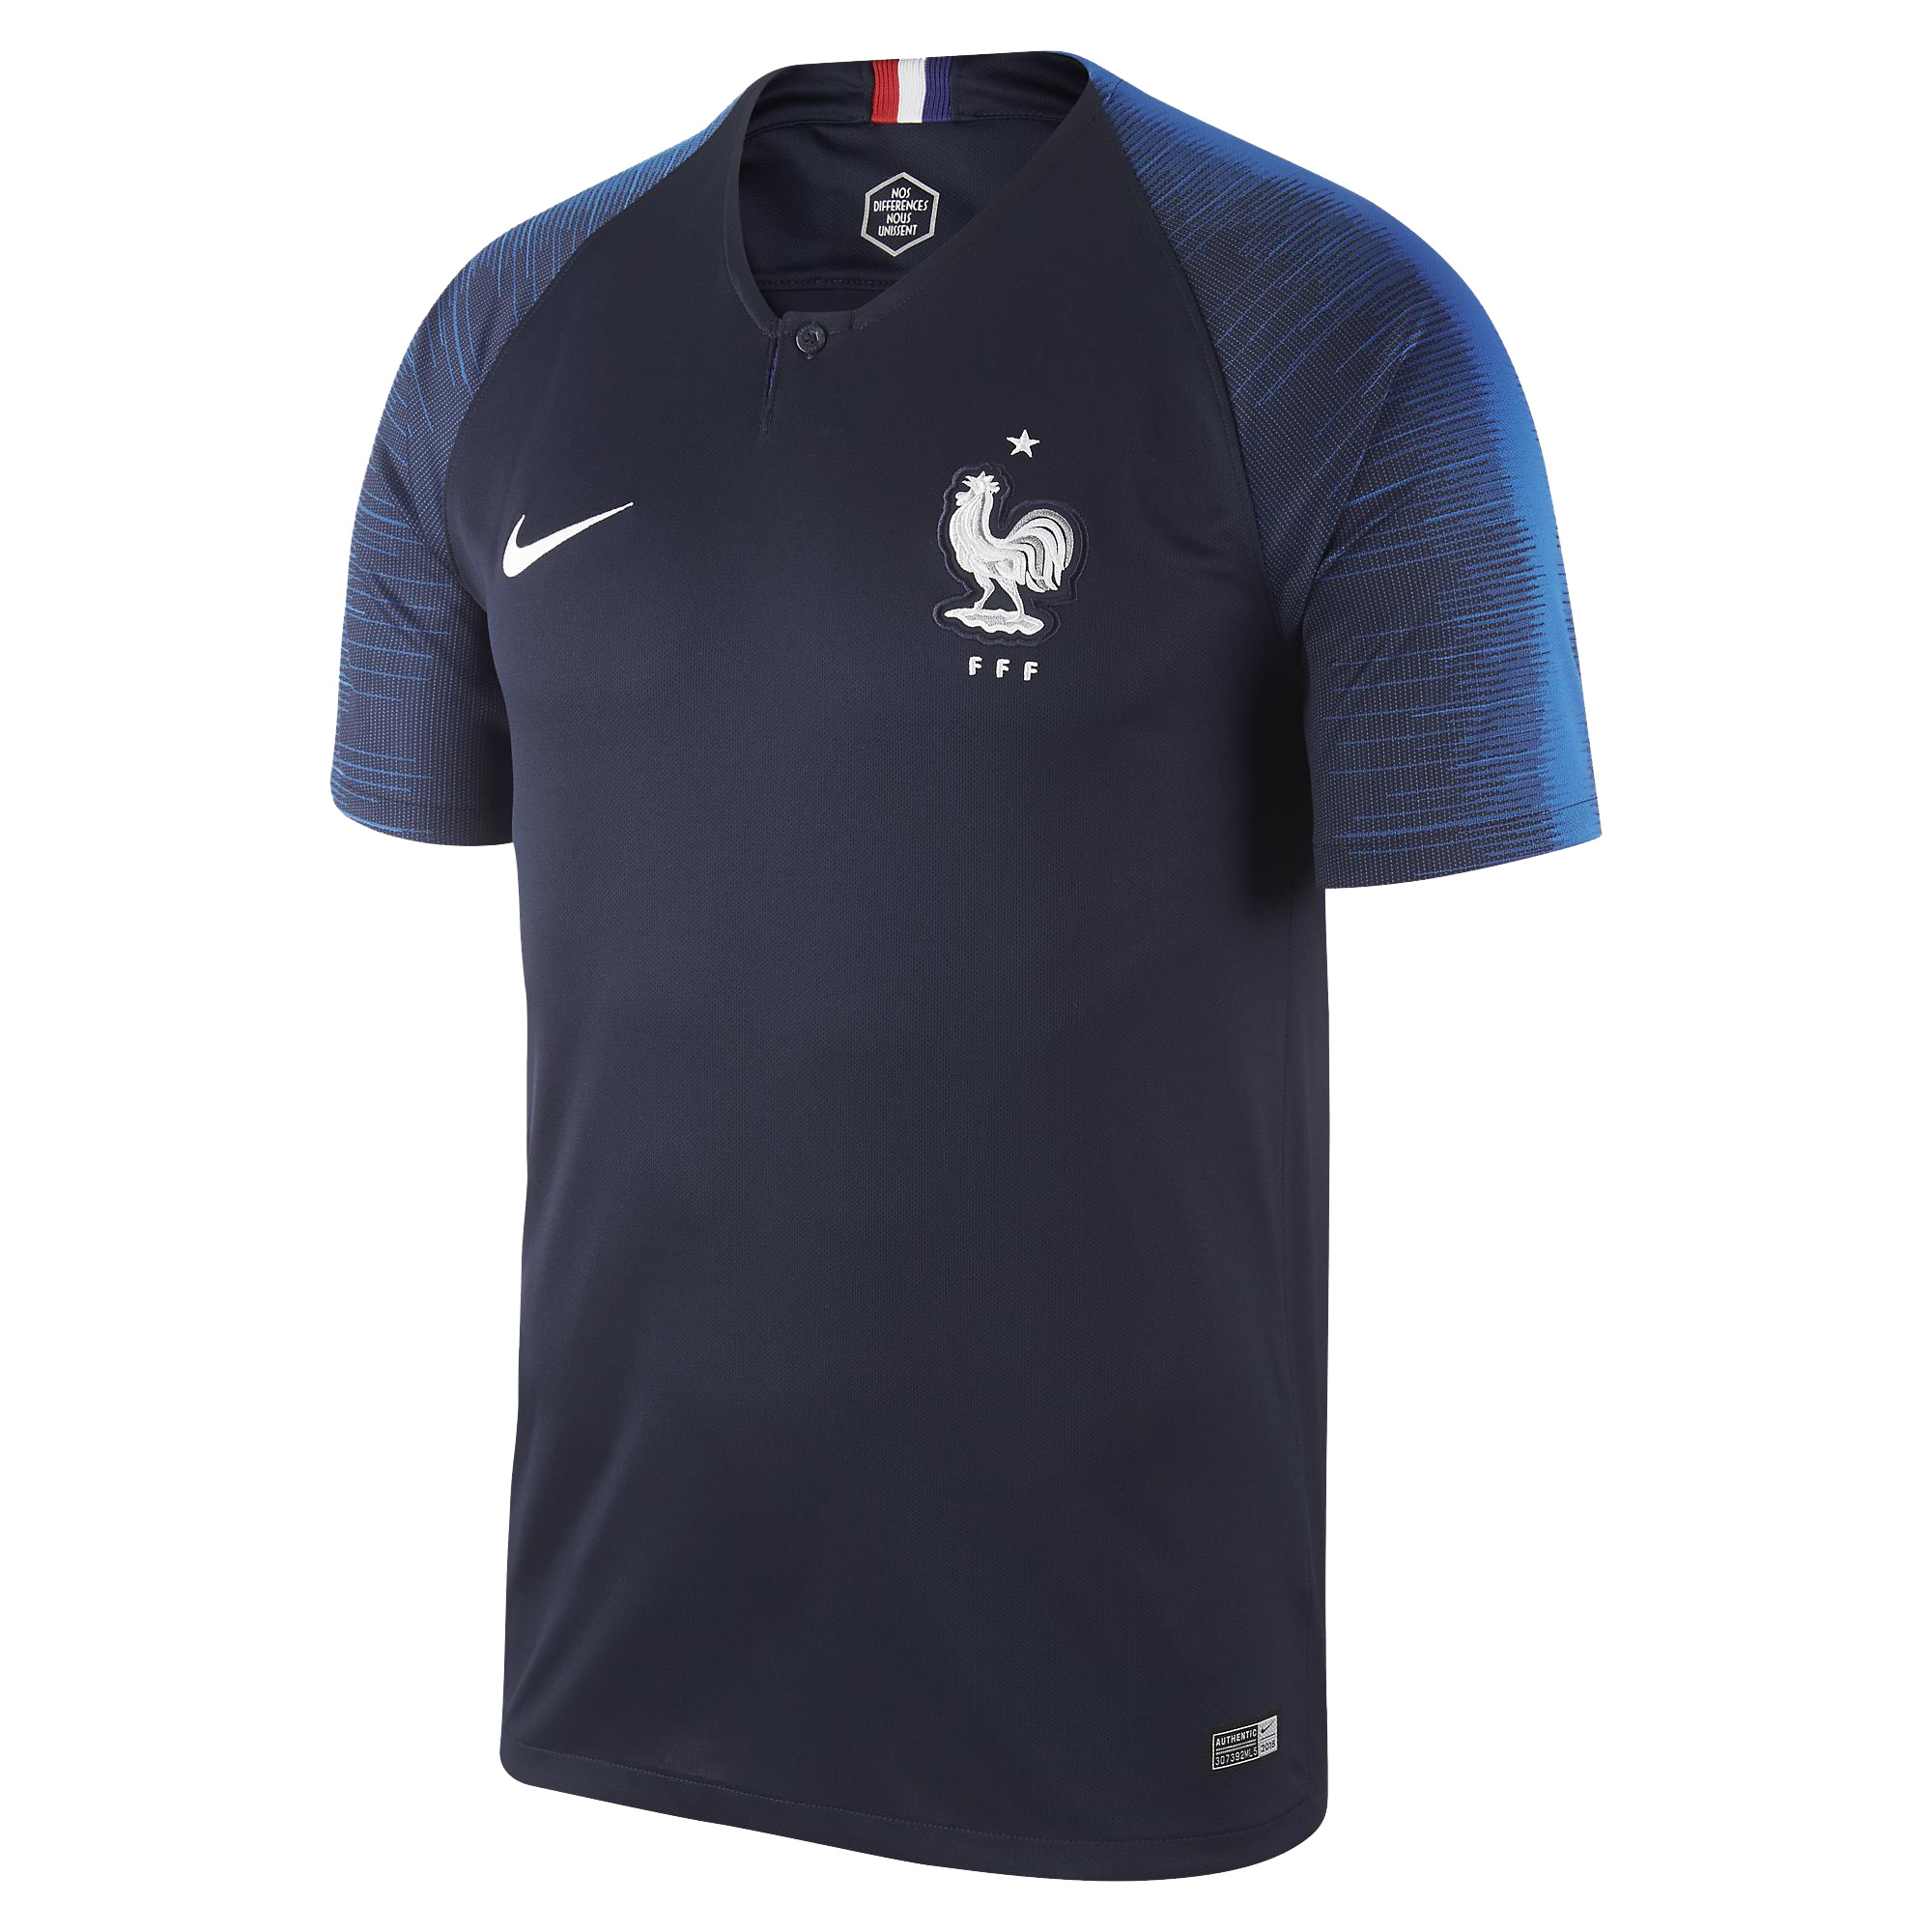 jersey france world cup 2018